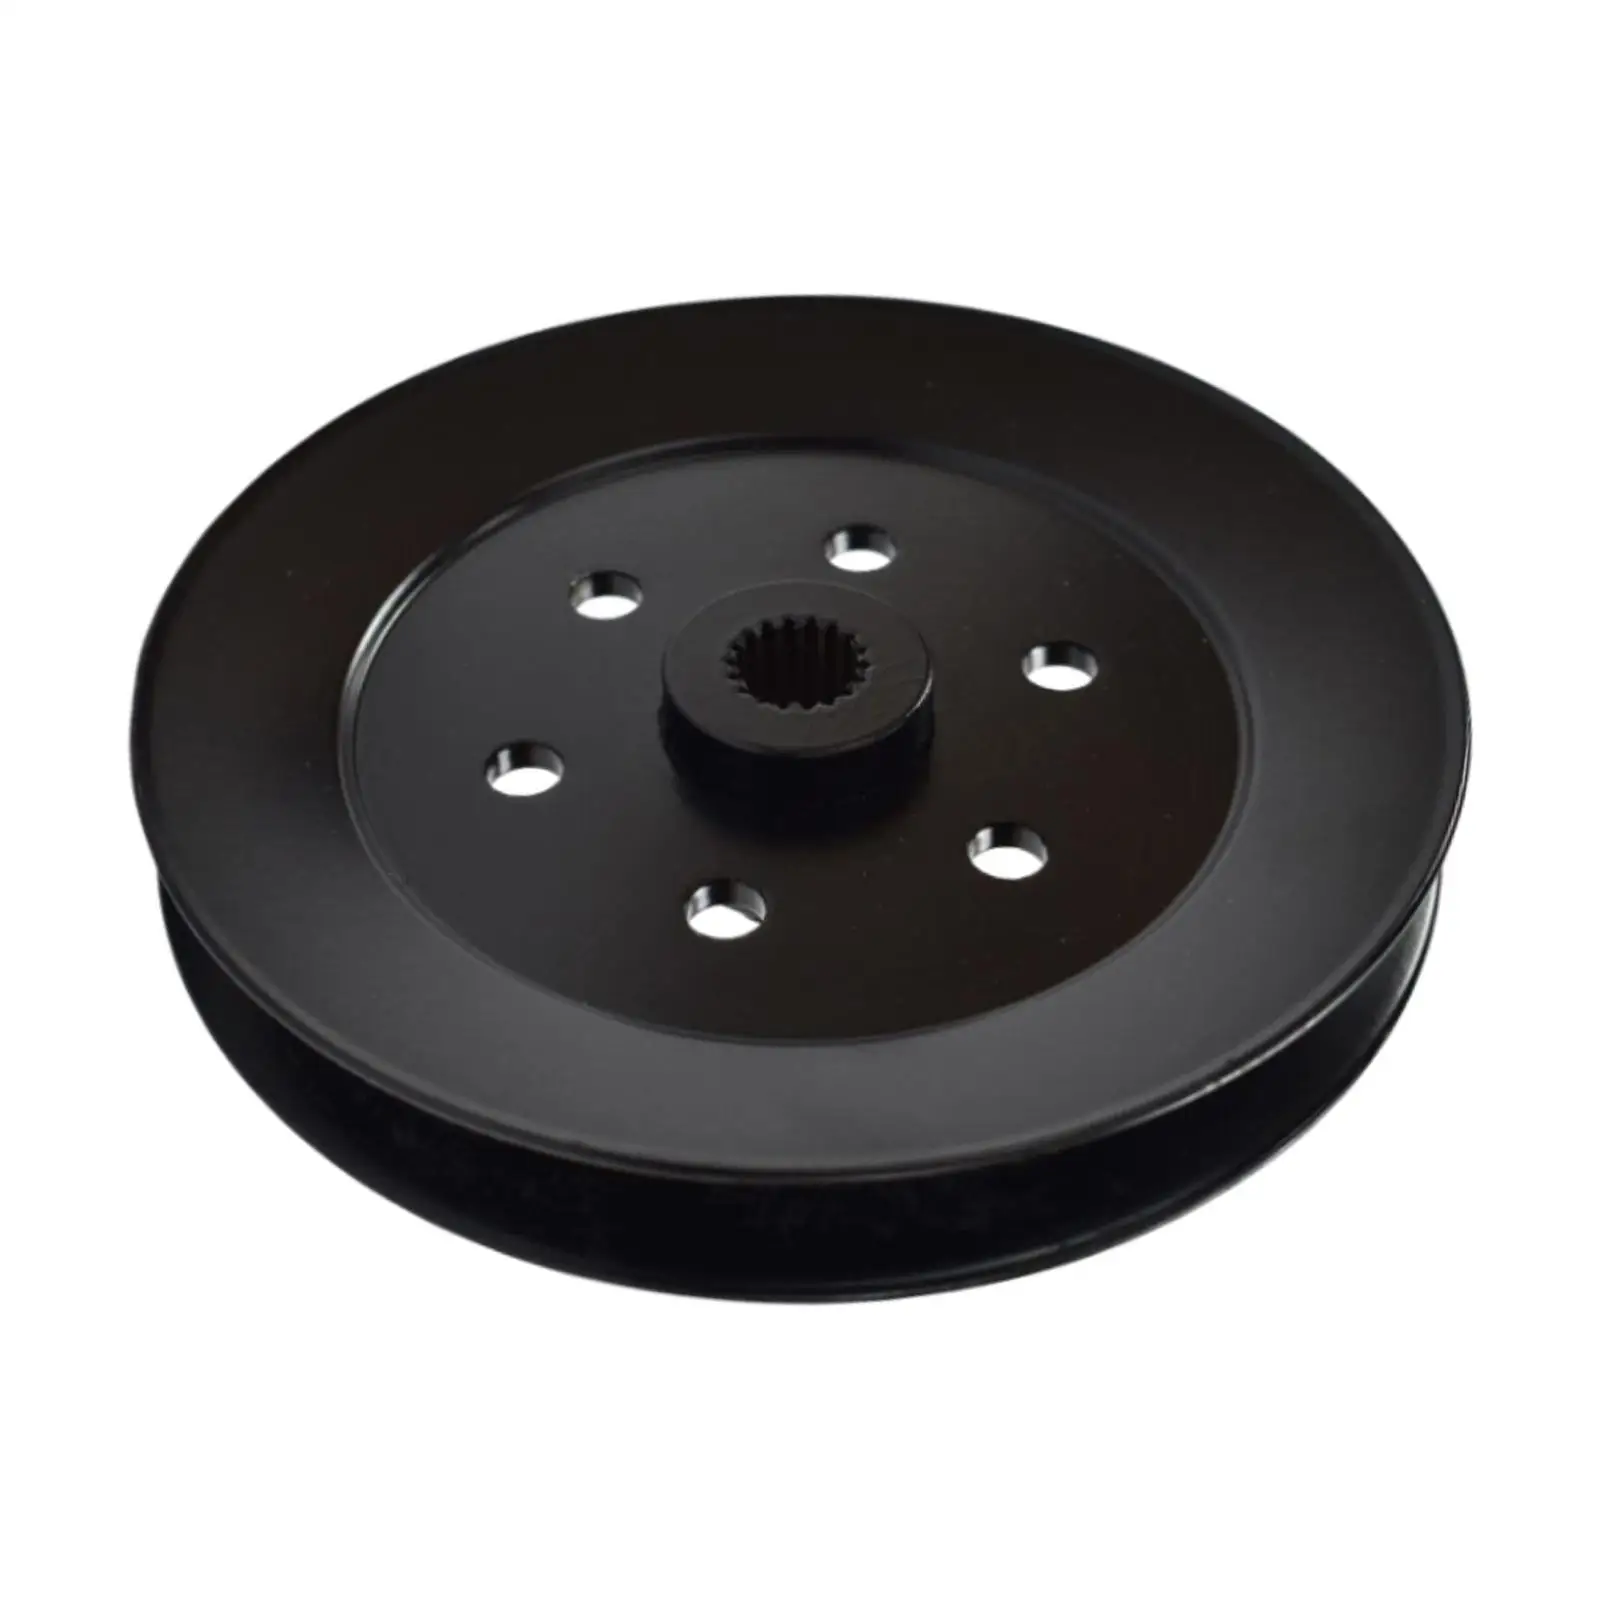 Pulley AM126129 Accessorie Durable Easily Install Lawn Tractors Parts Repair Assembly for LX277 S2348 LX178 LX266 S2554